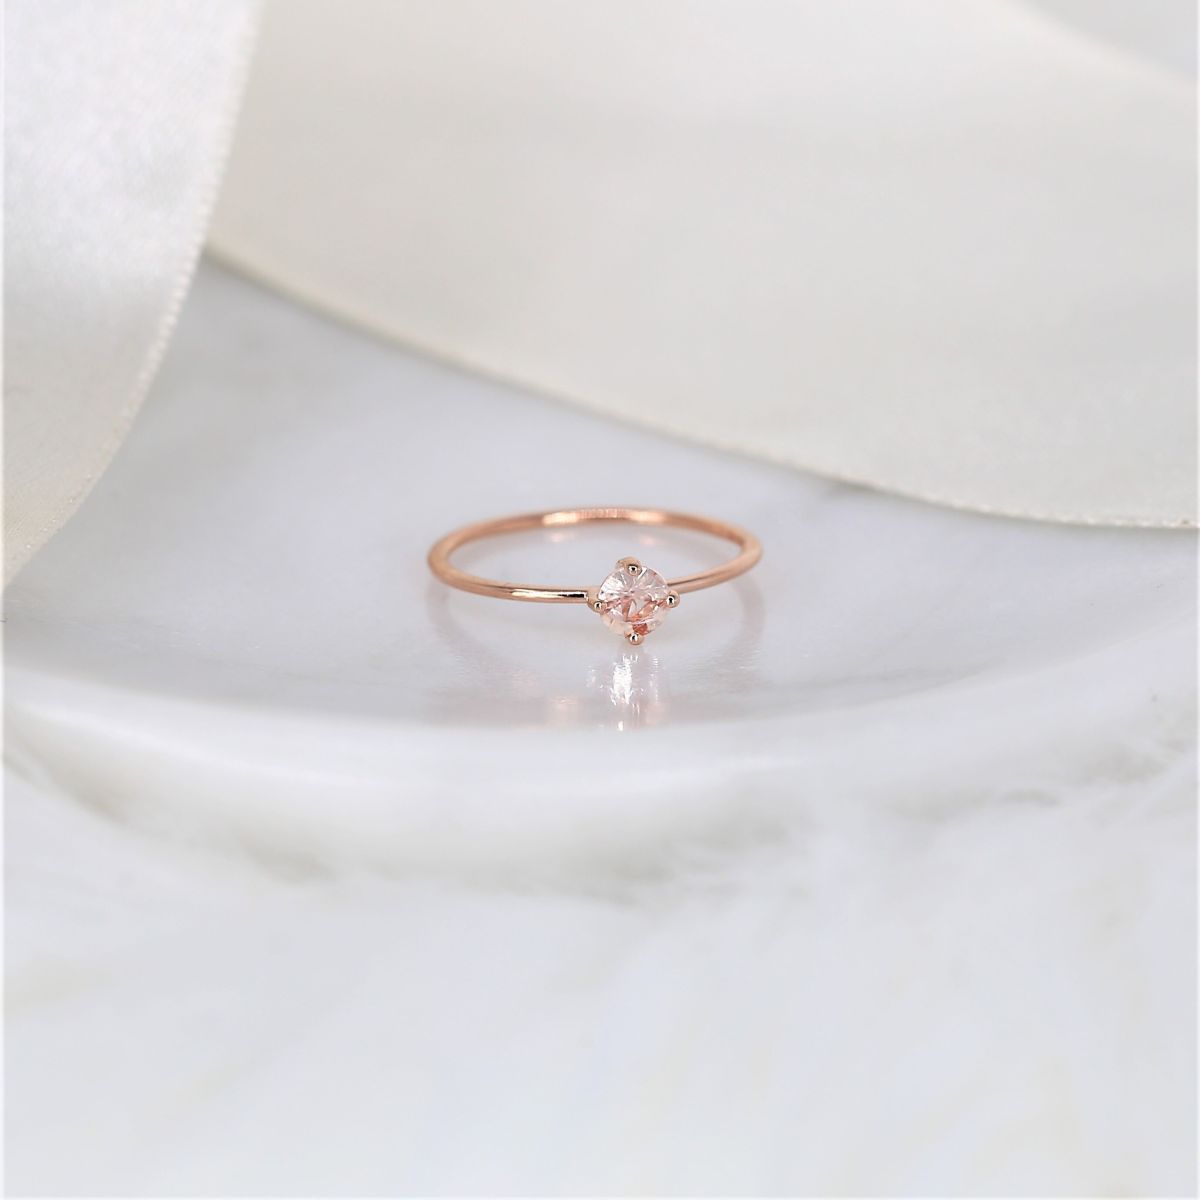 0.29ct Ready to Ship Ultra Petite Kiki 14kt Rose Gold Peach Champagne Sapphire Dainty Kite Stacking Ring,Pinky Ring,Rosados Box